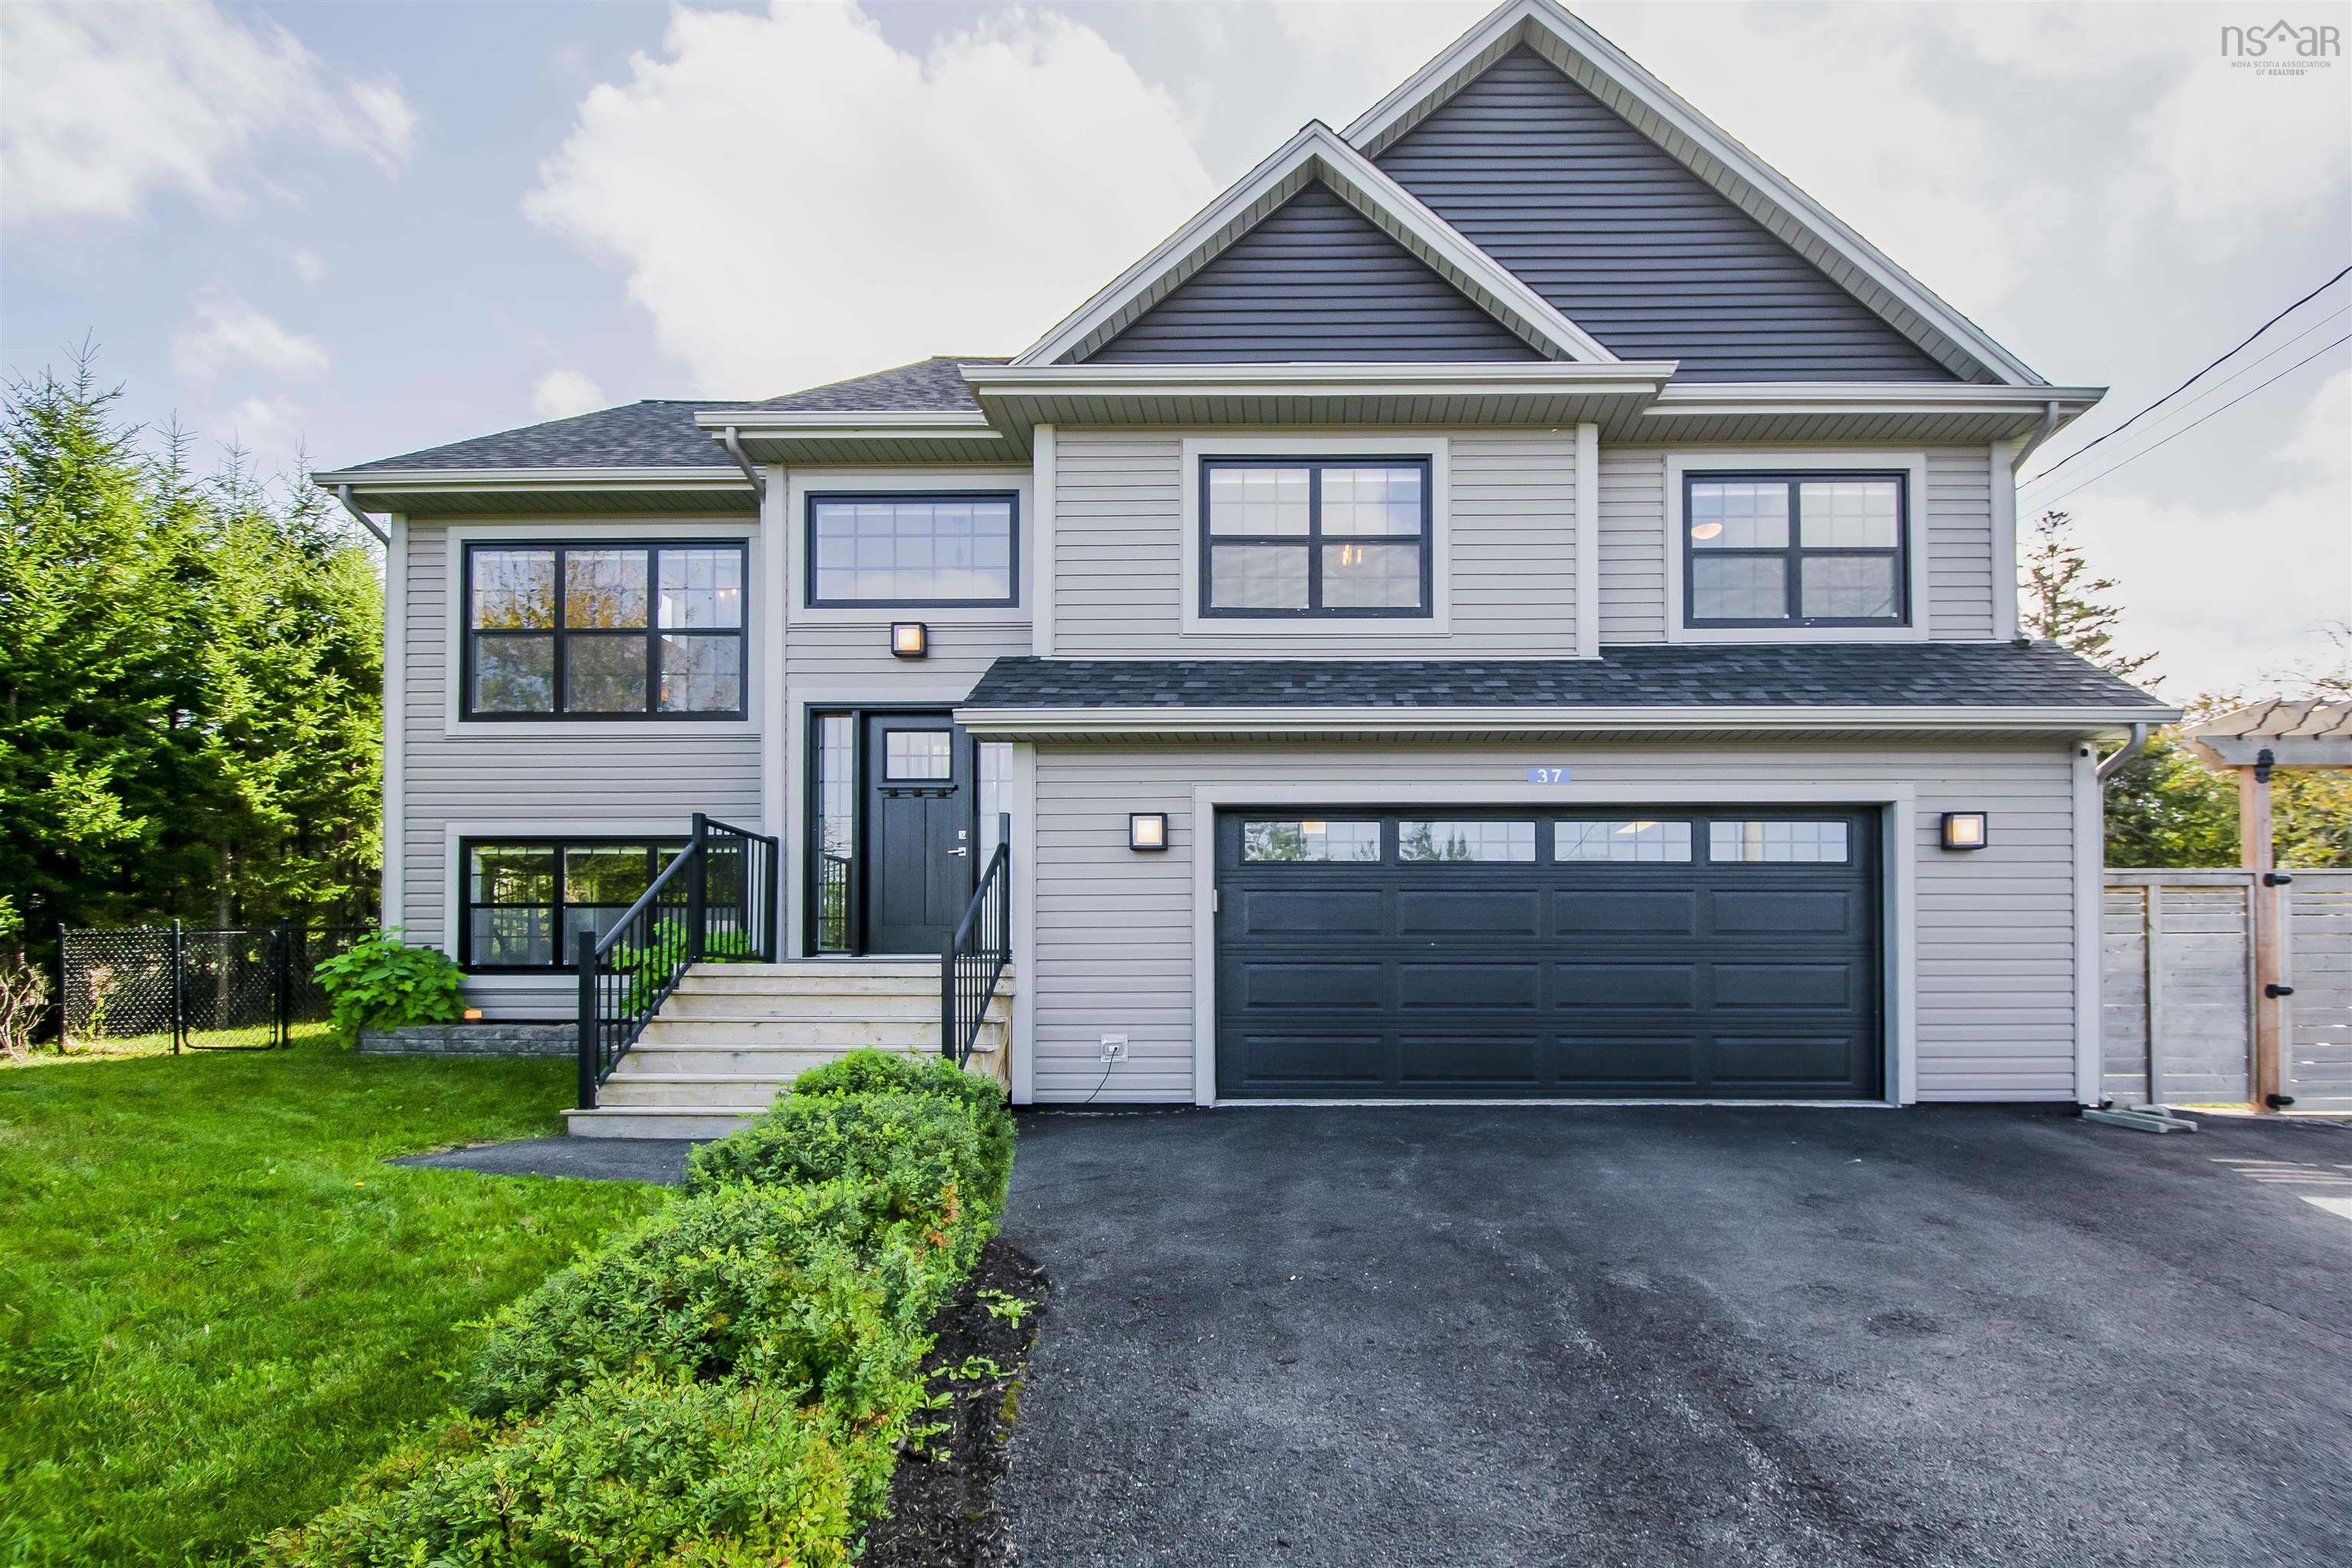 37 Crosswell Court, Hammonds Plains NS - MLS<sup>®</sup>: # 202403852